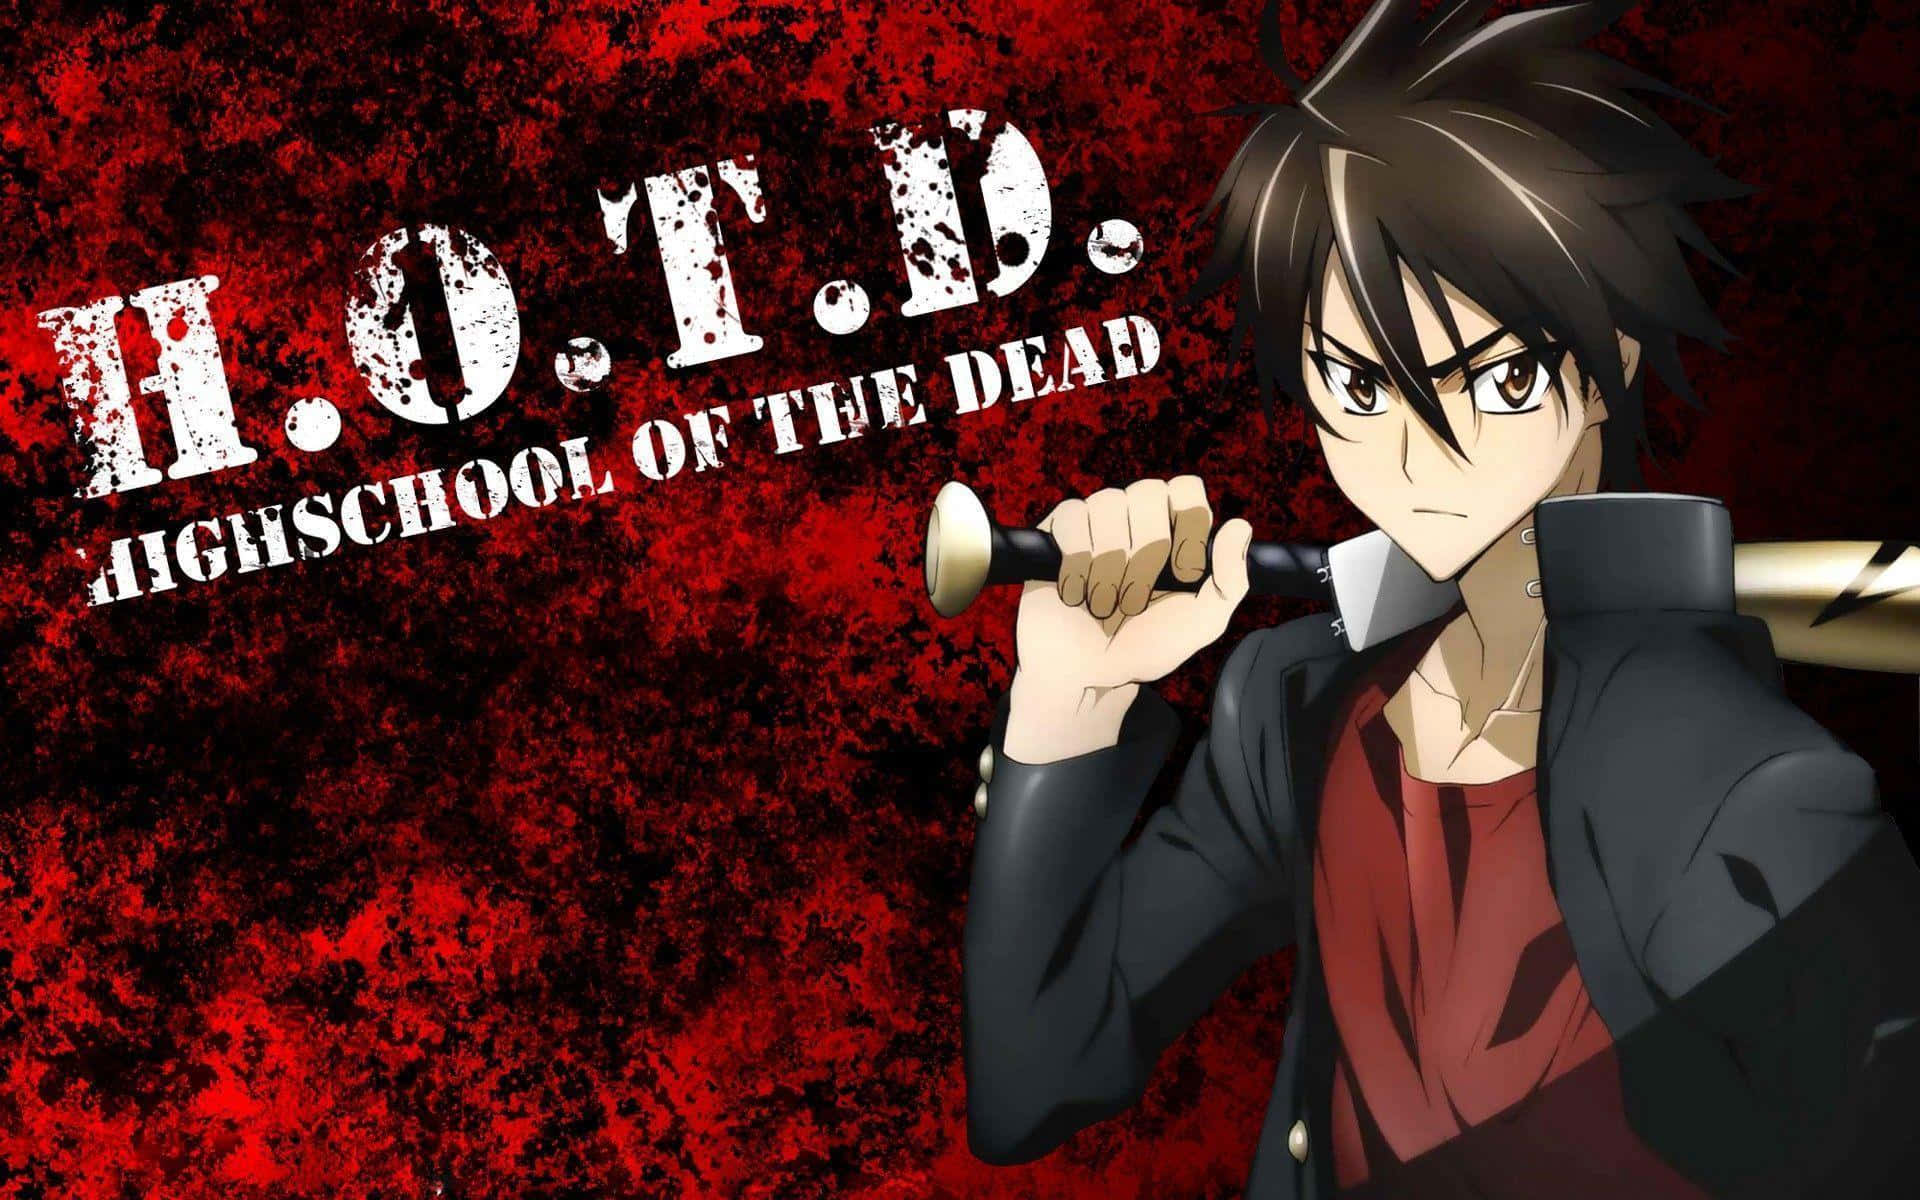 Surviving the zombie apocalypse in Highschool Of The Dead